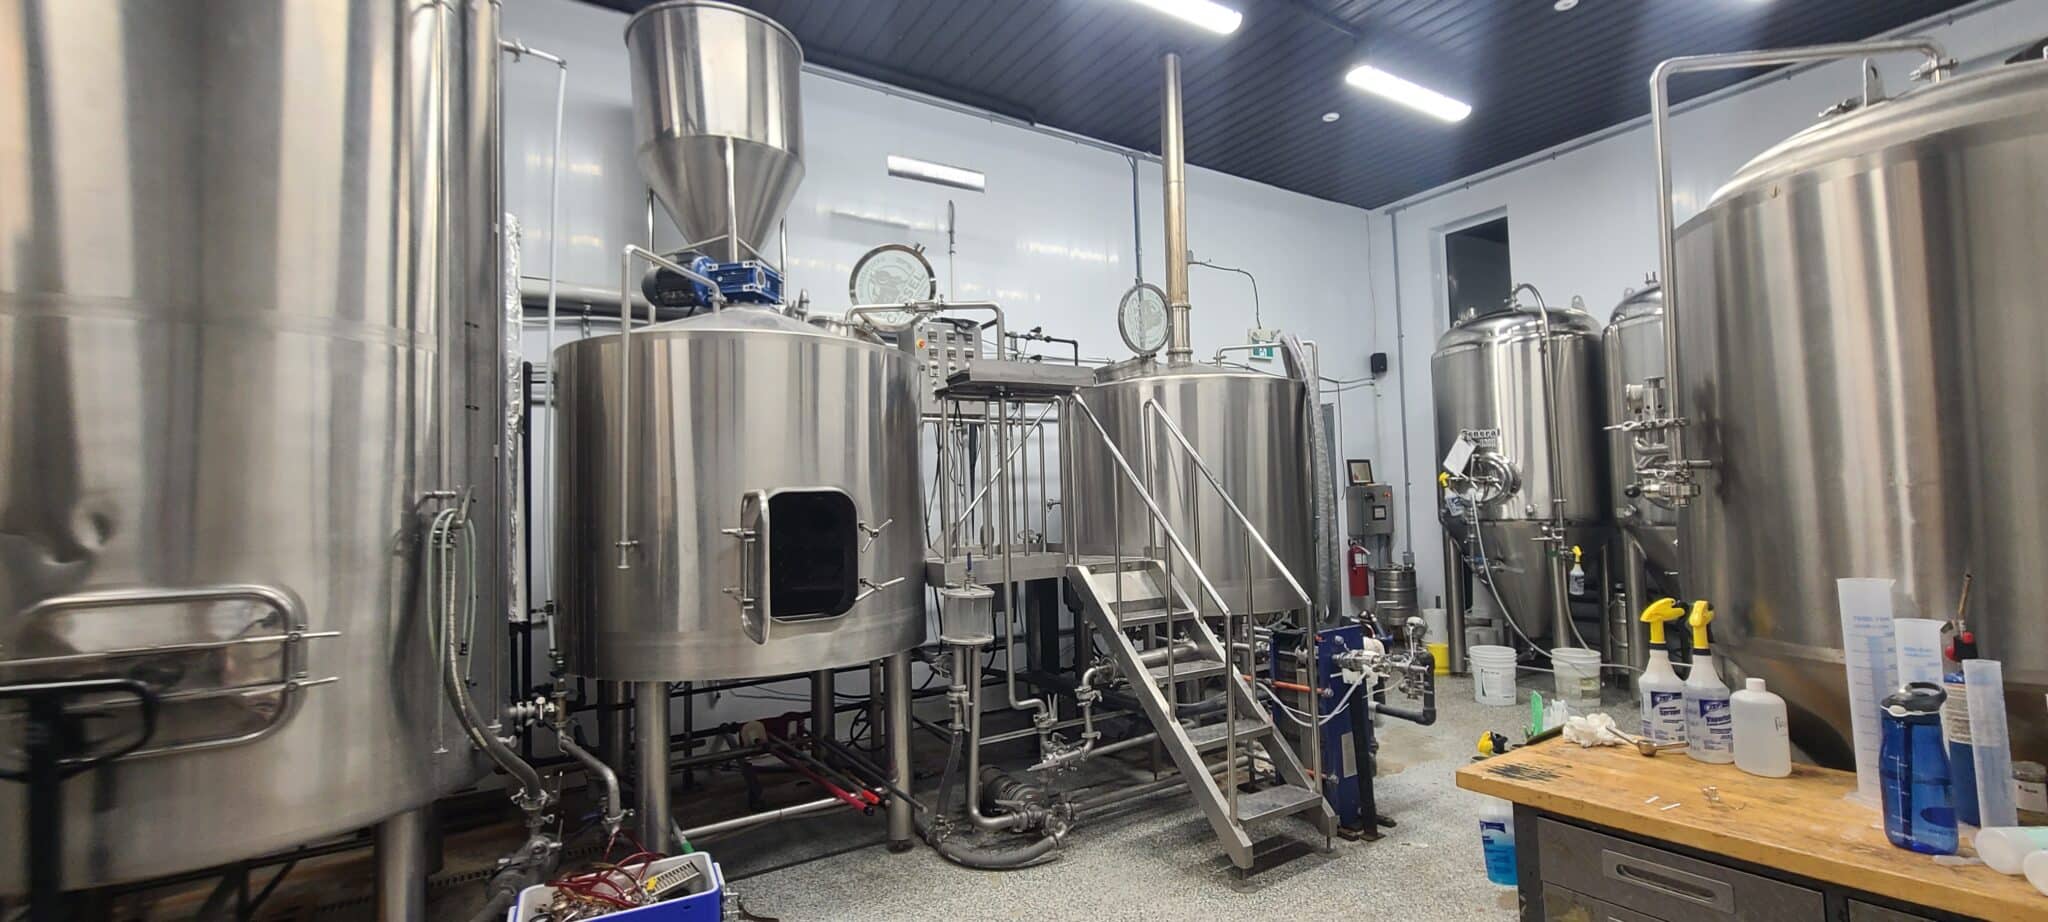 Brewhouse or Brewing Systems